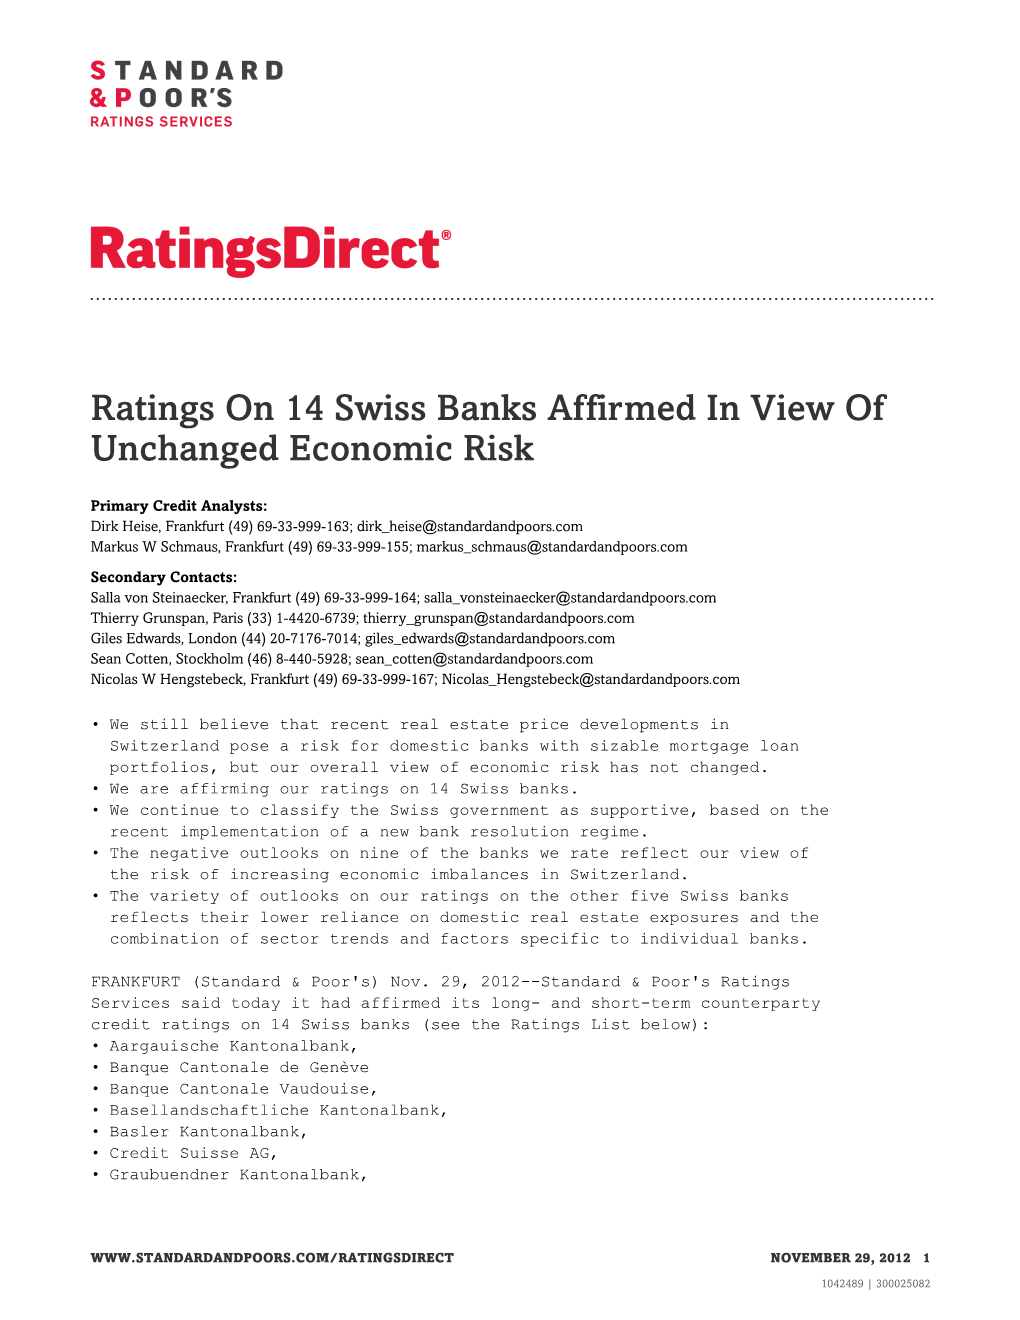 Ratings on 14 Swiss Banks Affirmed in View of Unchanged Economic Risk